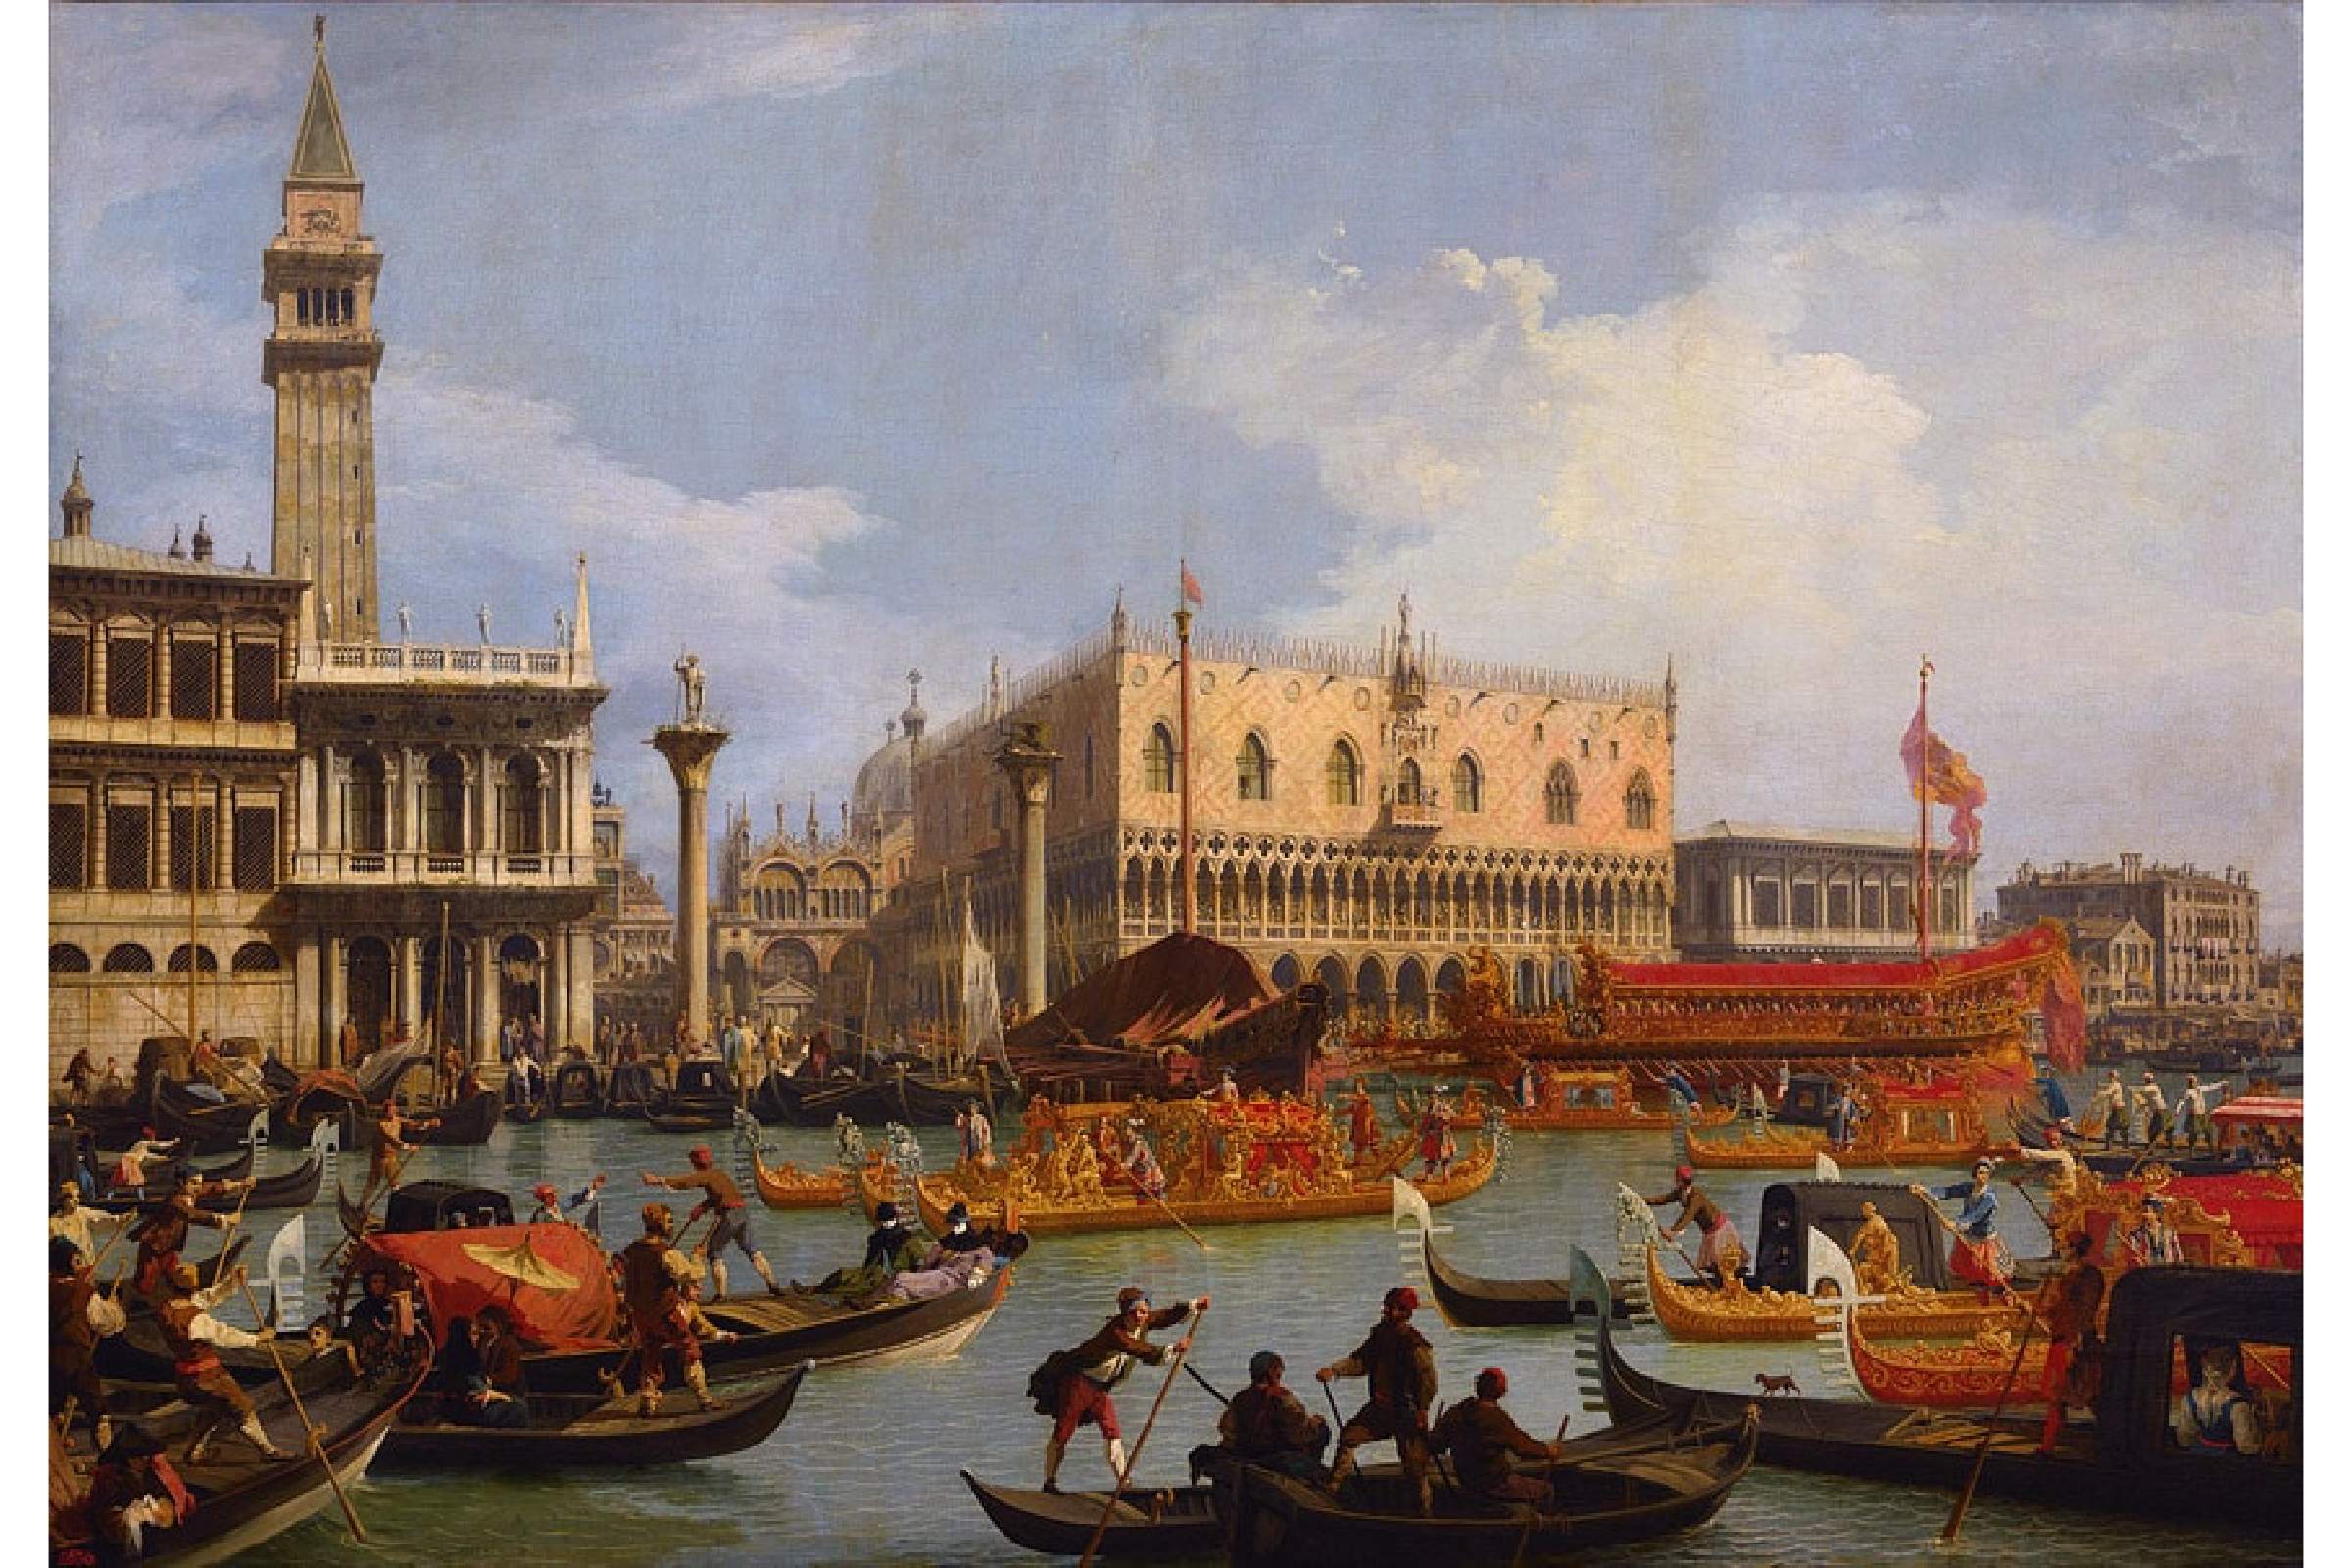 canaletto bucentaur return to the pier by the palazzo ducale